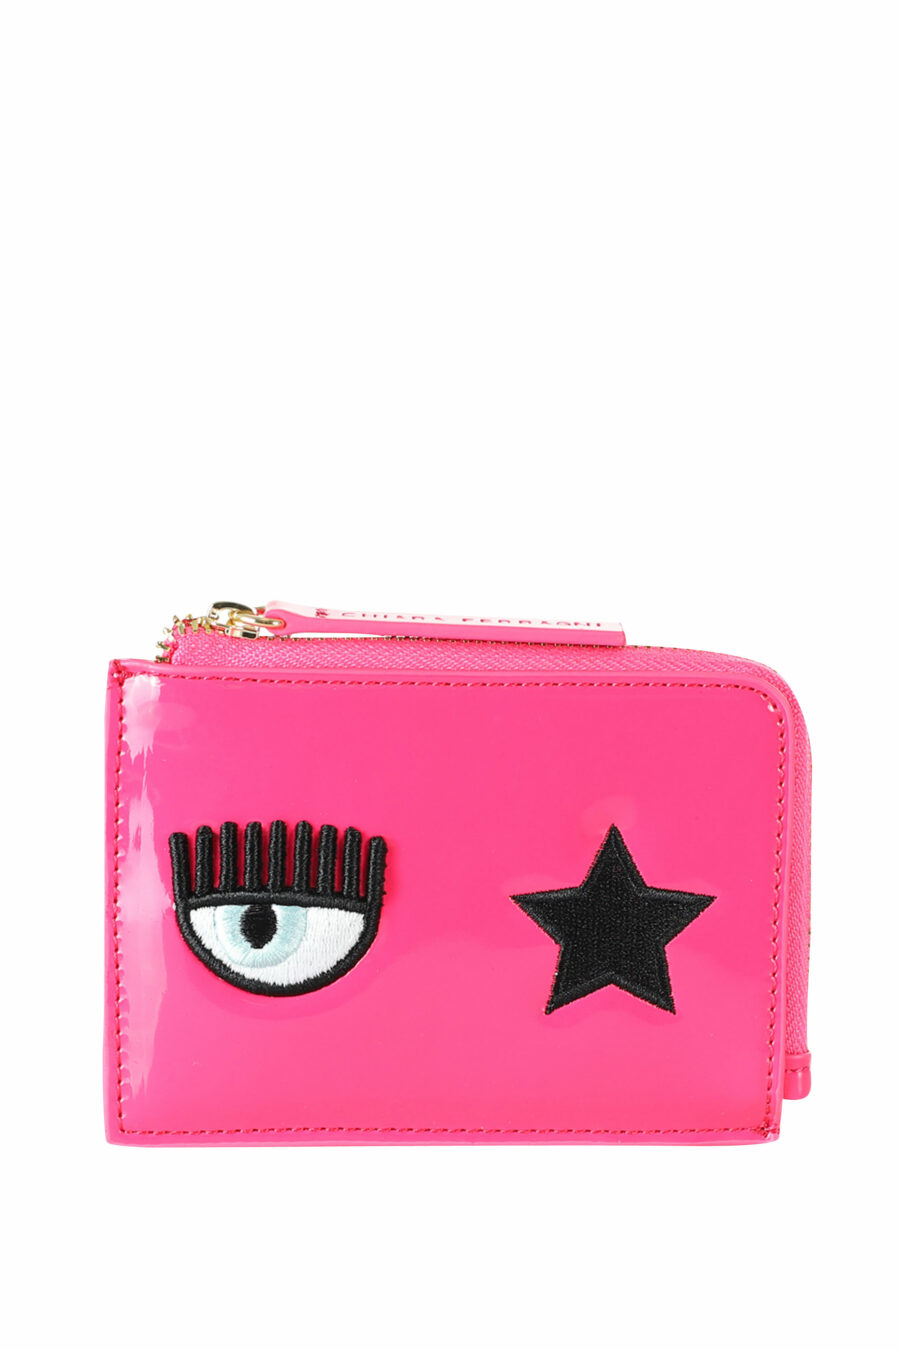 Bright fuchsia wallet with eye and star logo - 8052672353781